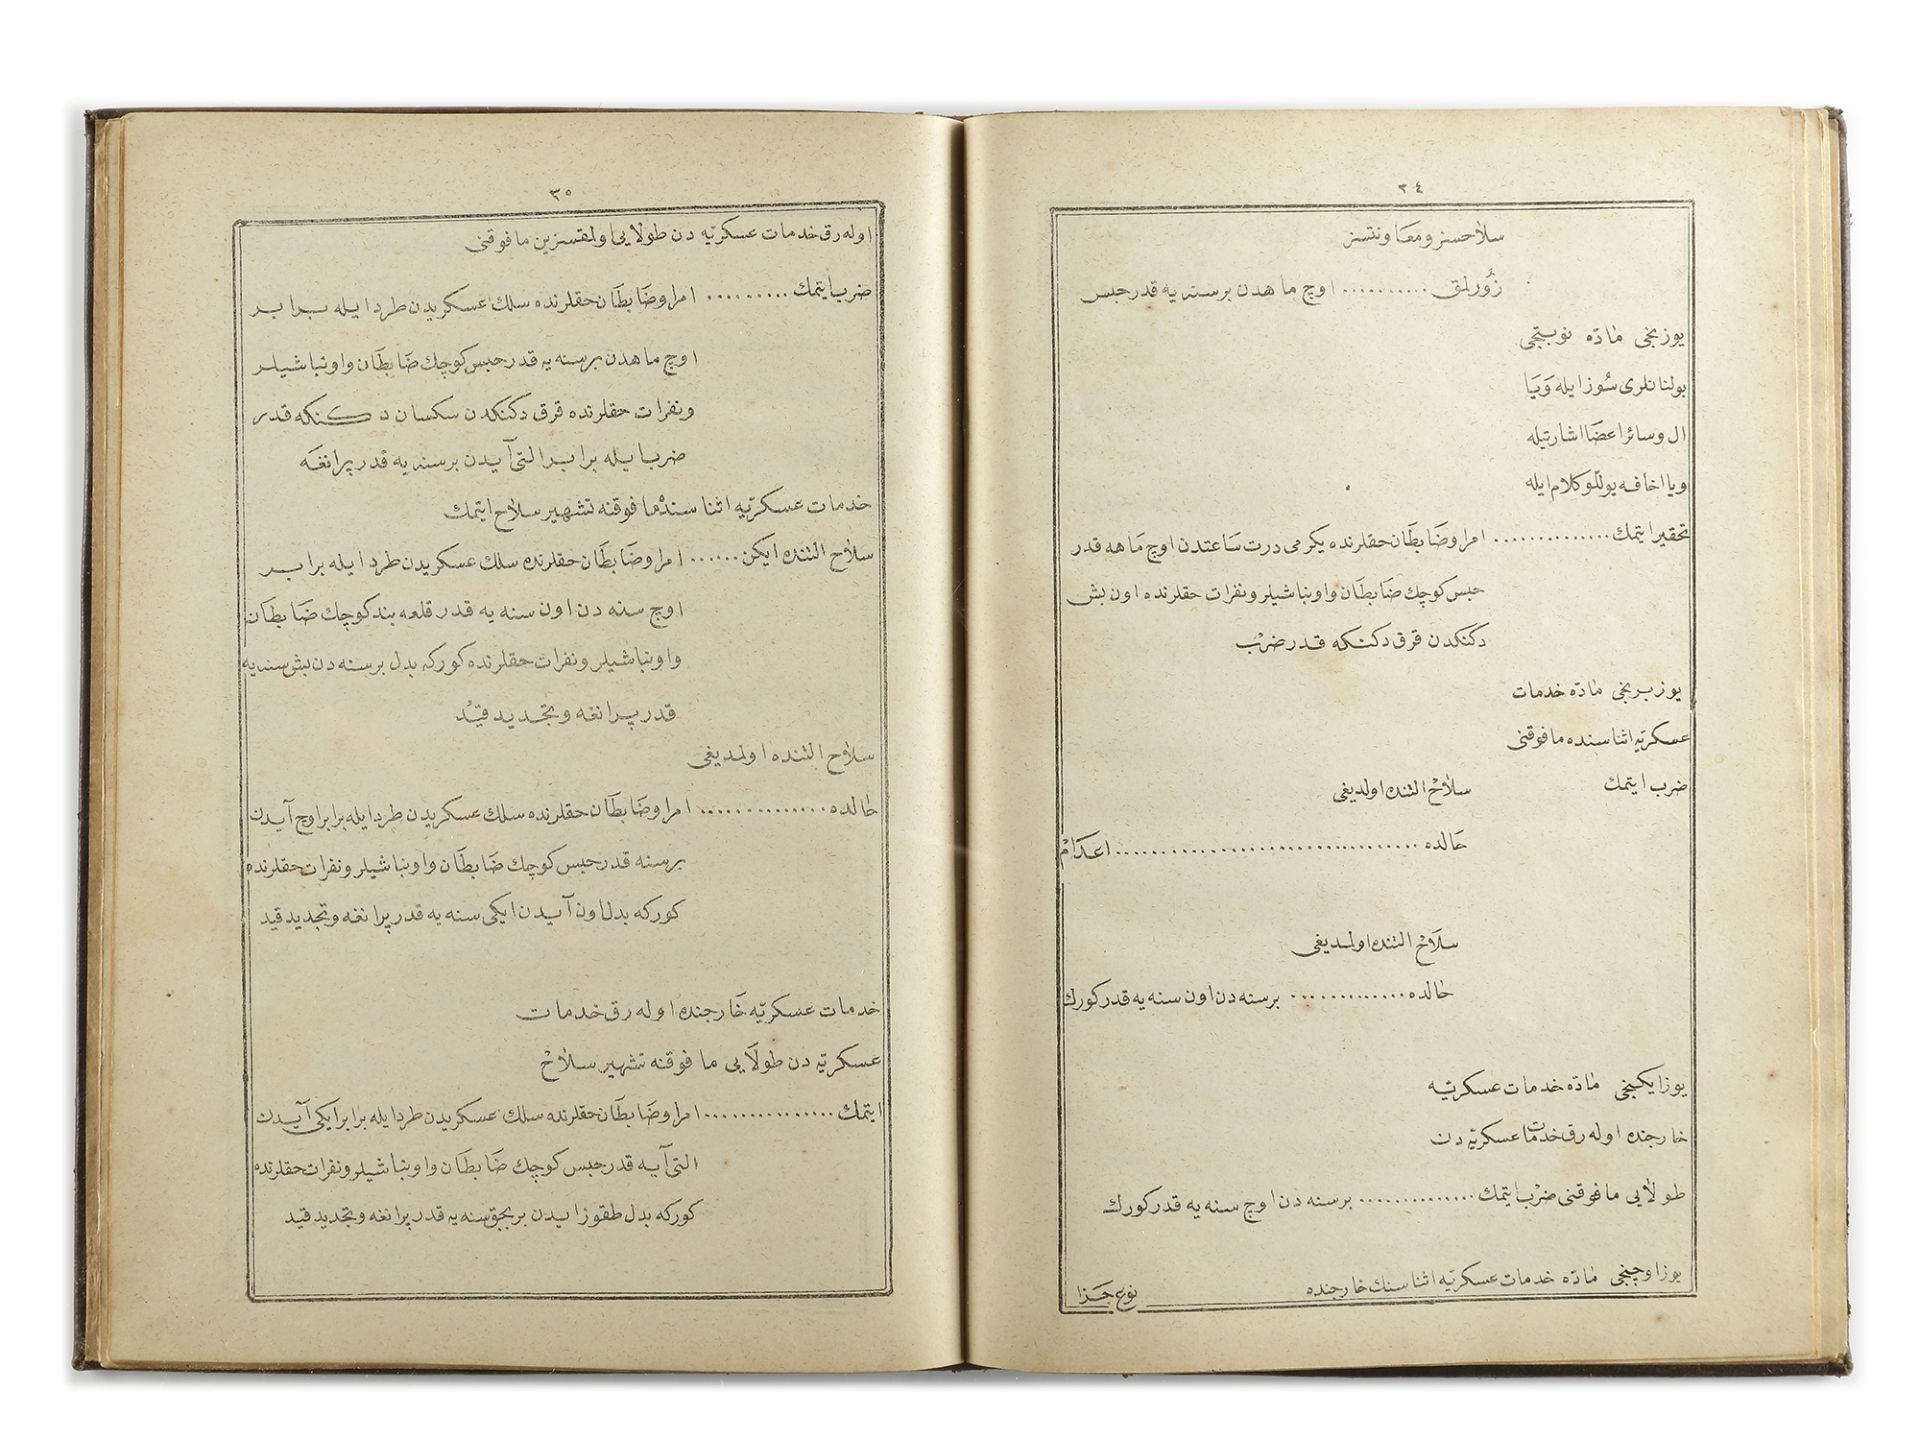 OTTOMAN MILITARY PENAL CODE, ISTANBUL DATED 1287 AH/ 1871 AD - Image 5 of 6